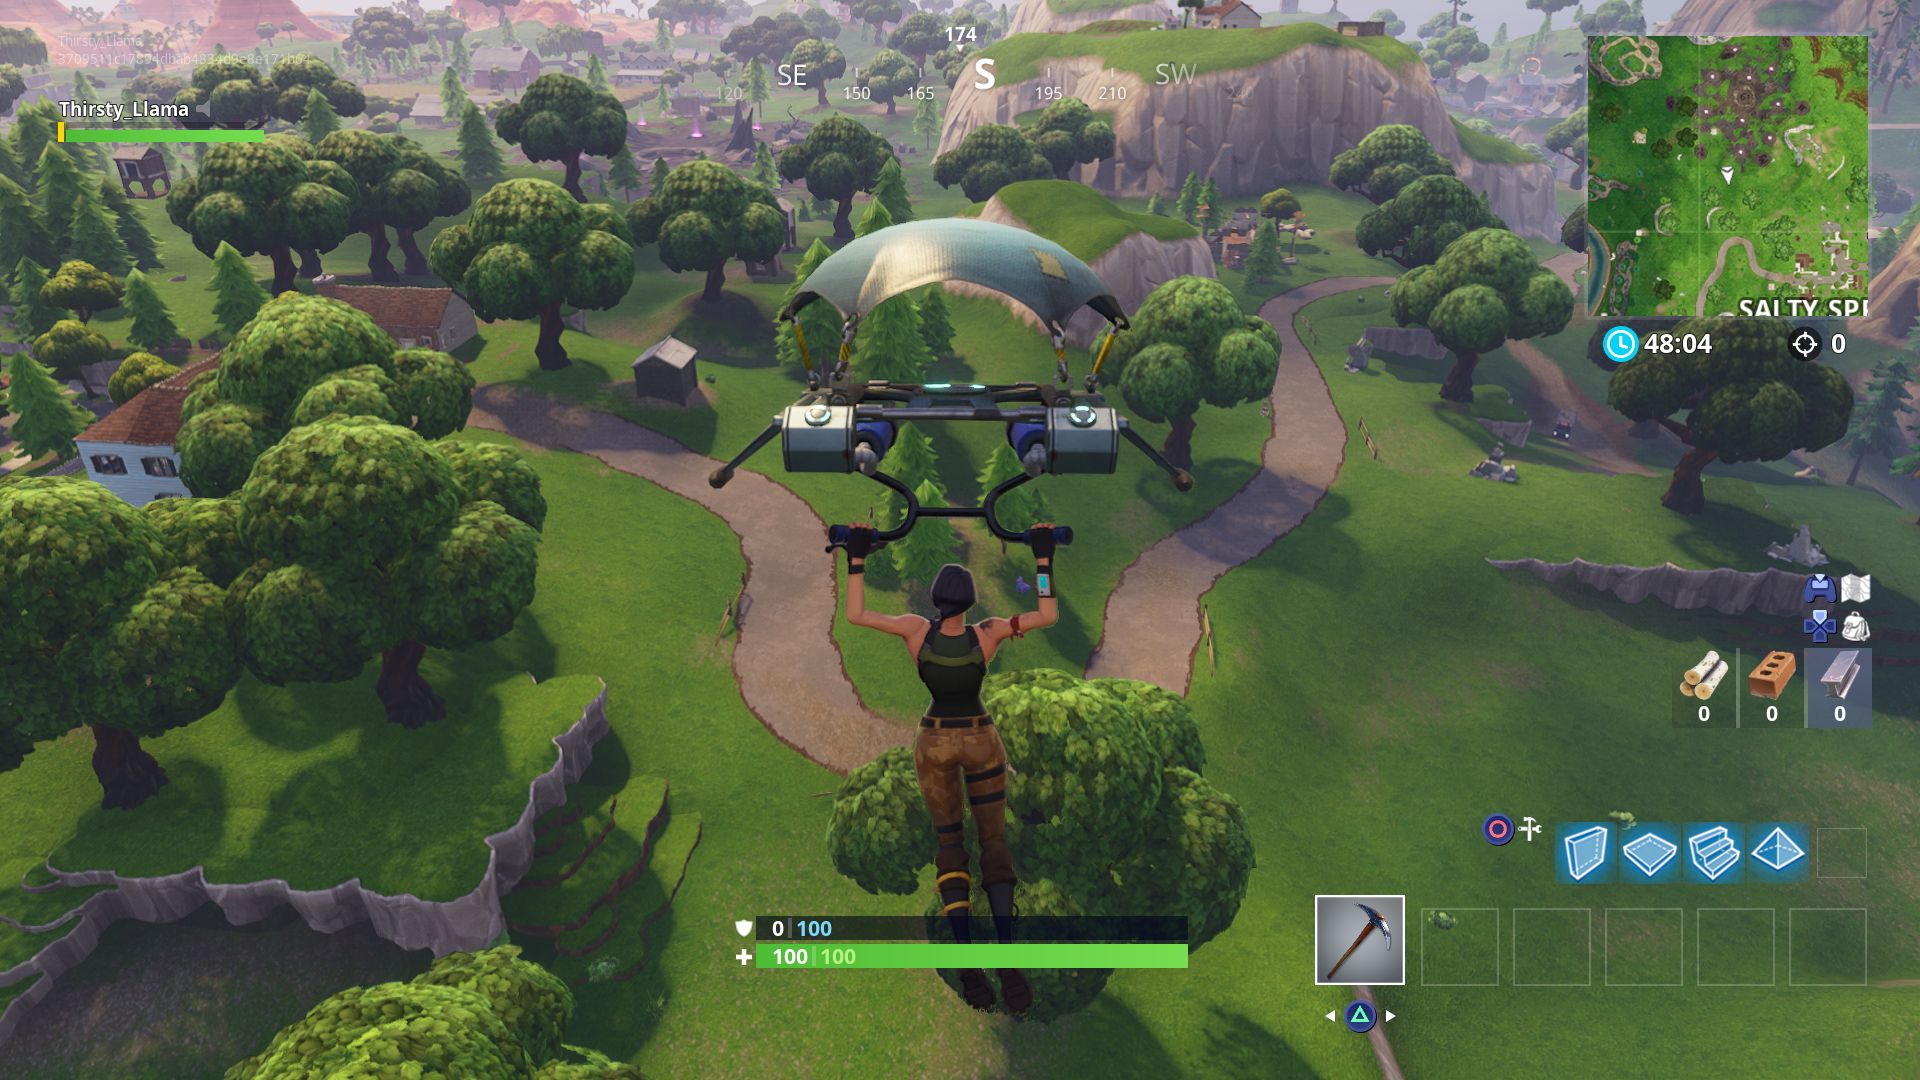 Image for Fortnite: consume five apples - where to find apples on the map